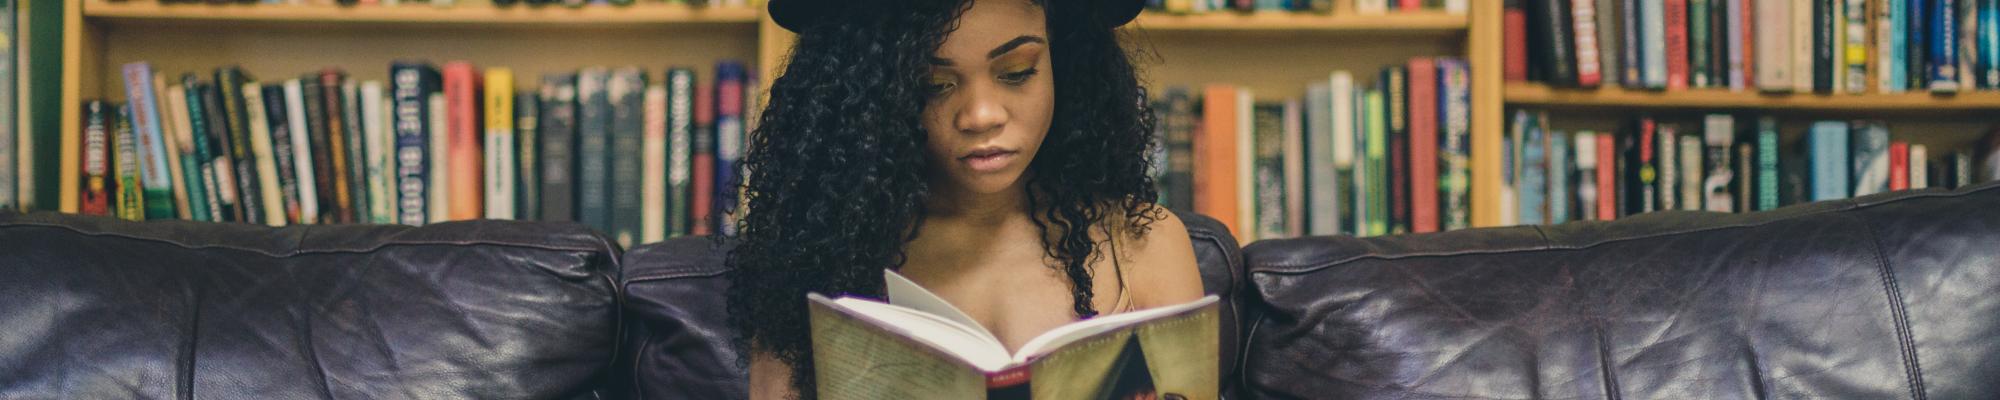 Young woman in a hat reading in a library.